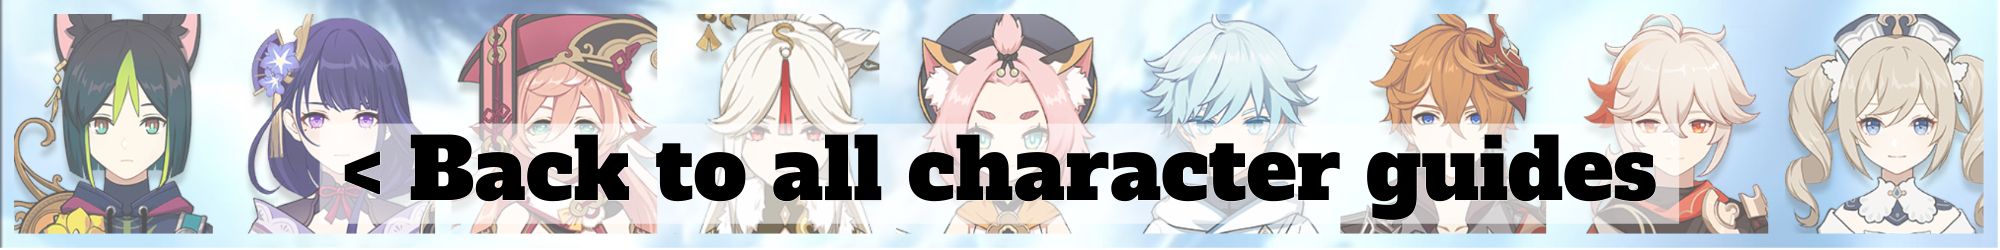 character guide link-1